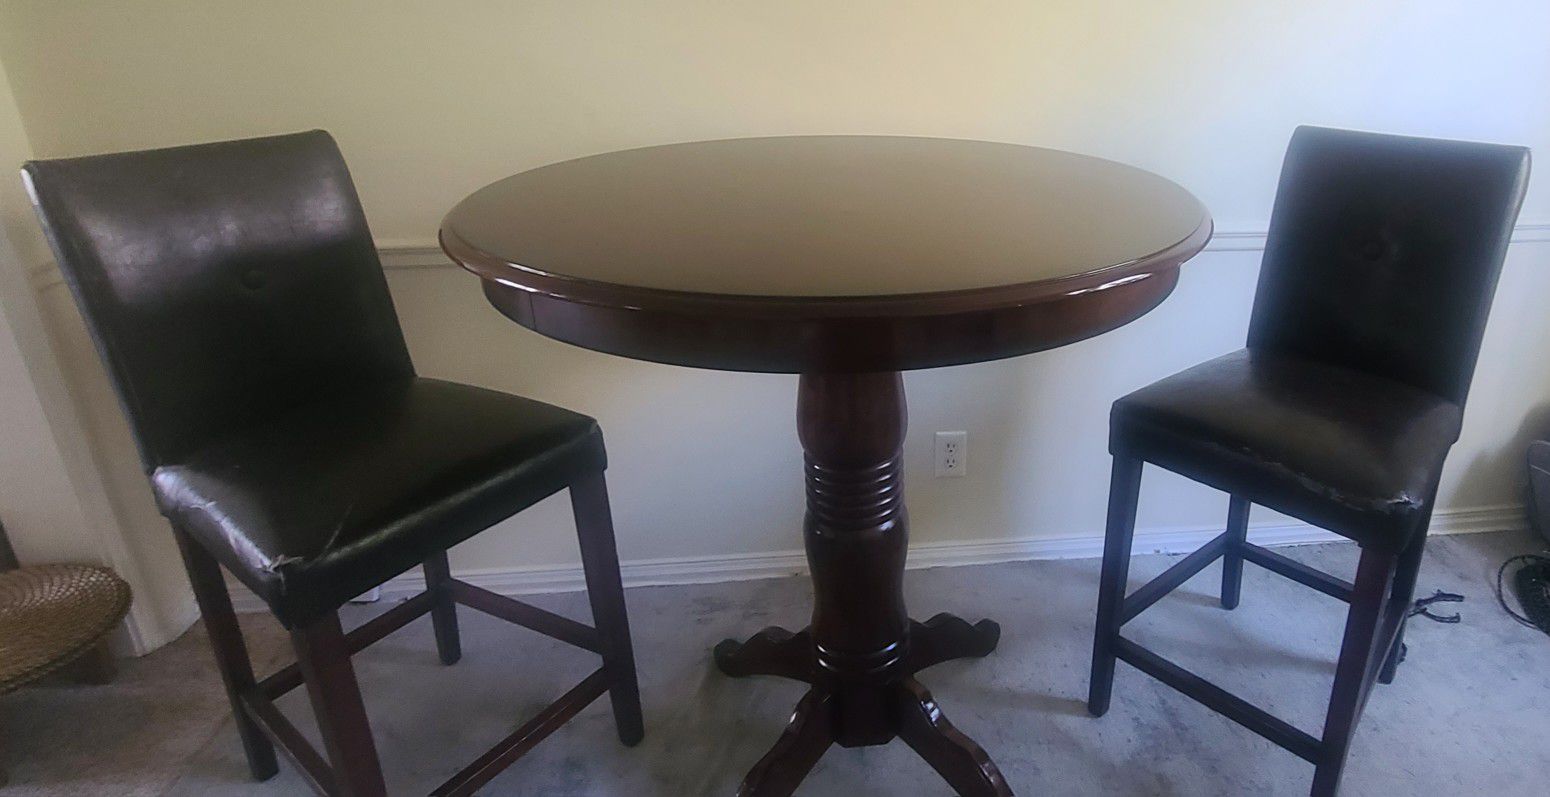 Pier 1 Imports Dining Table 